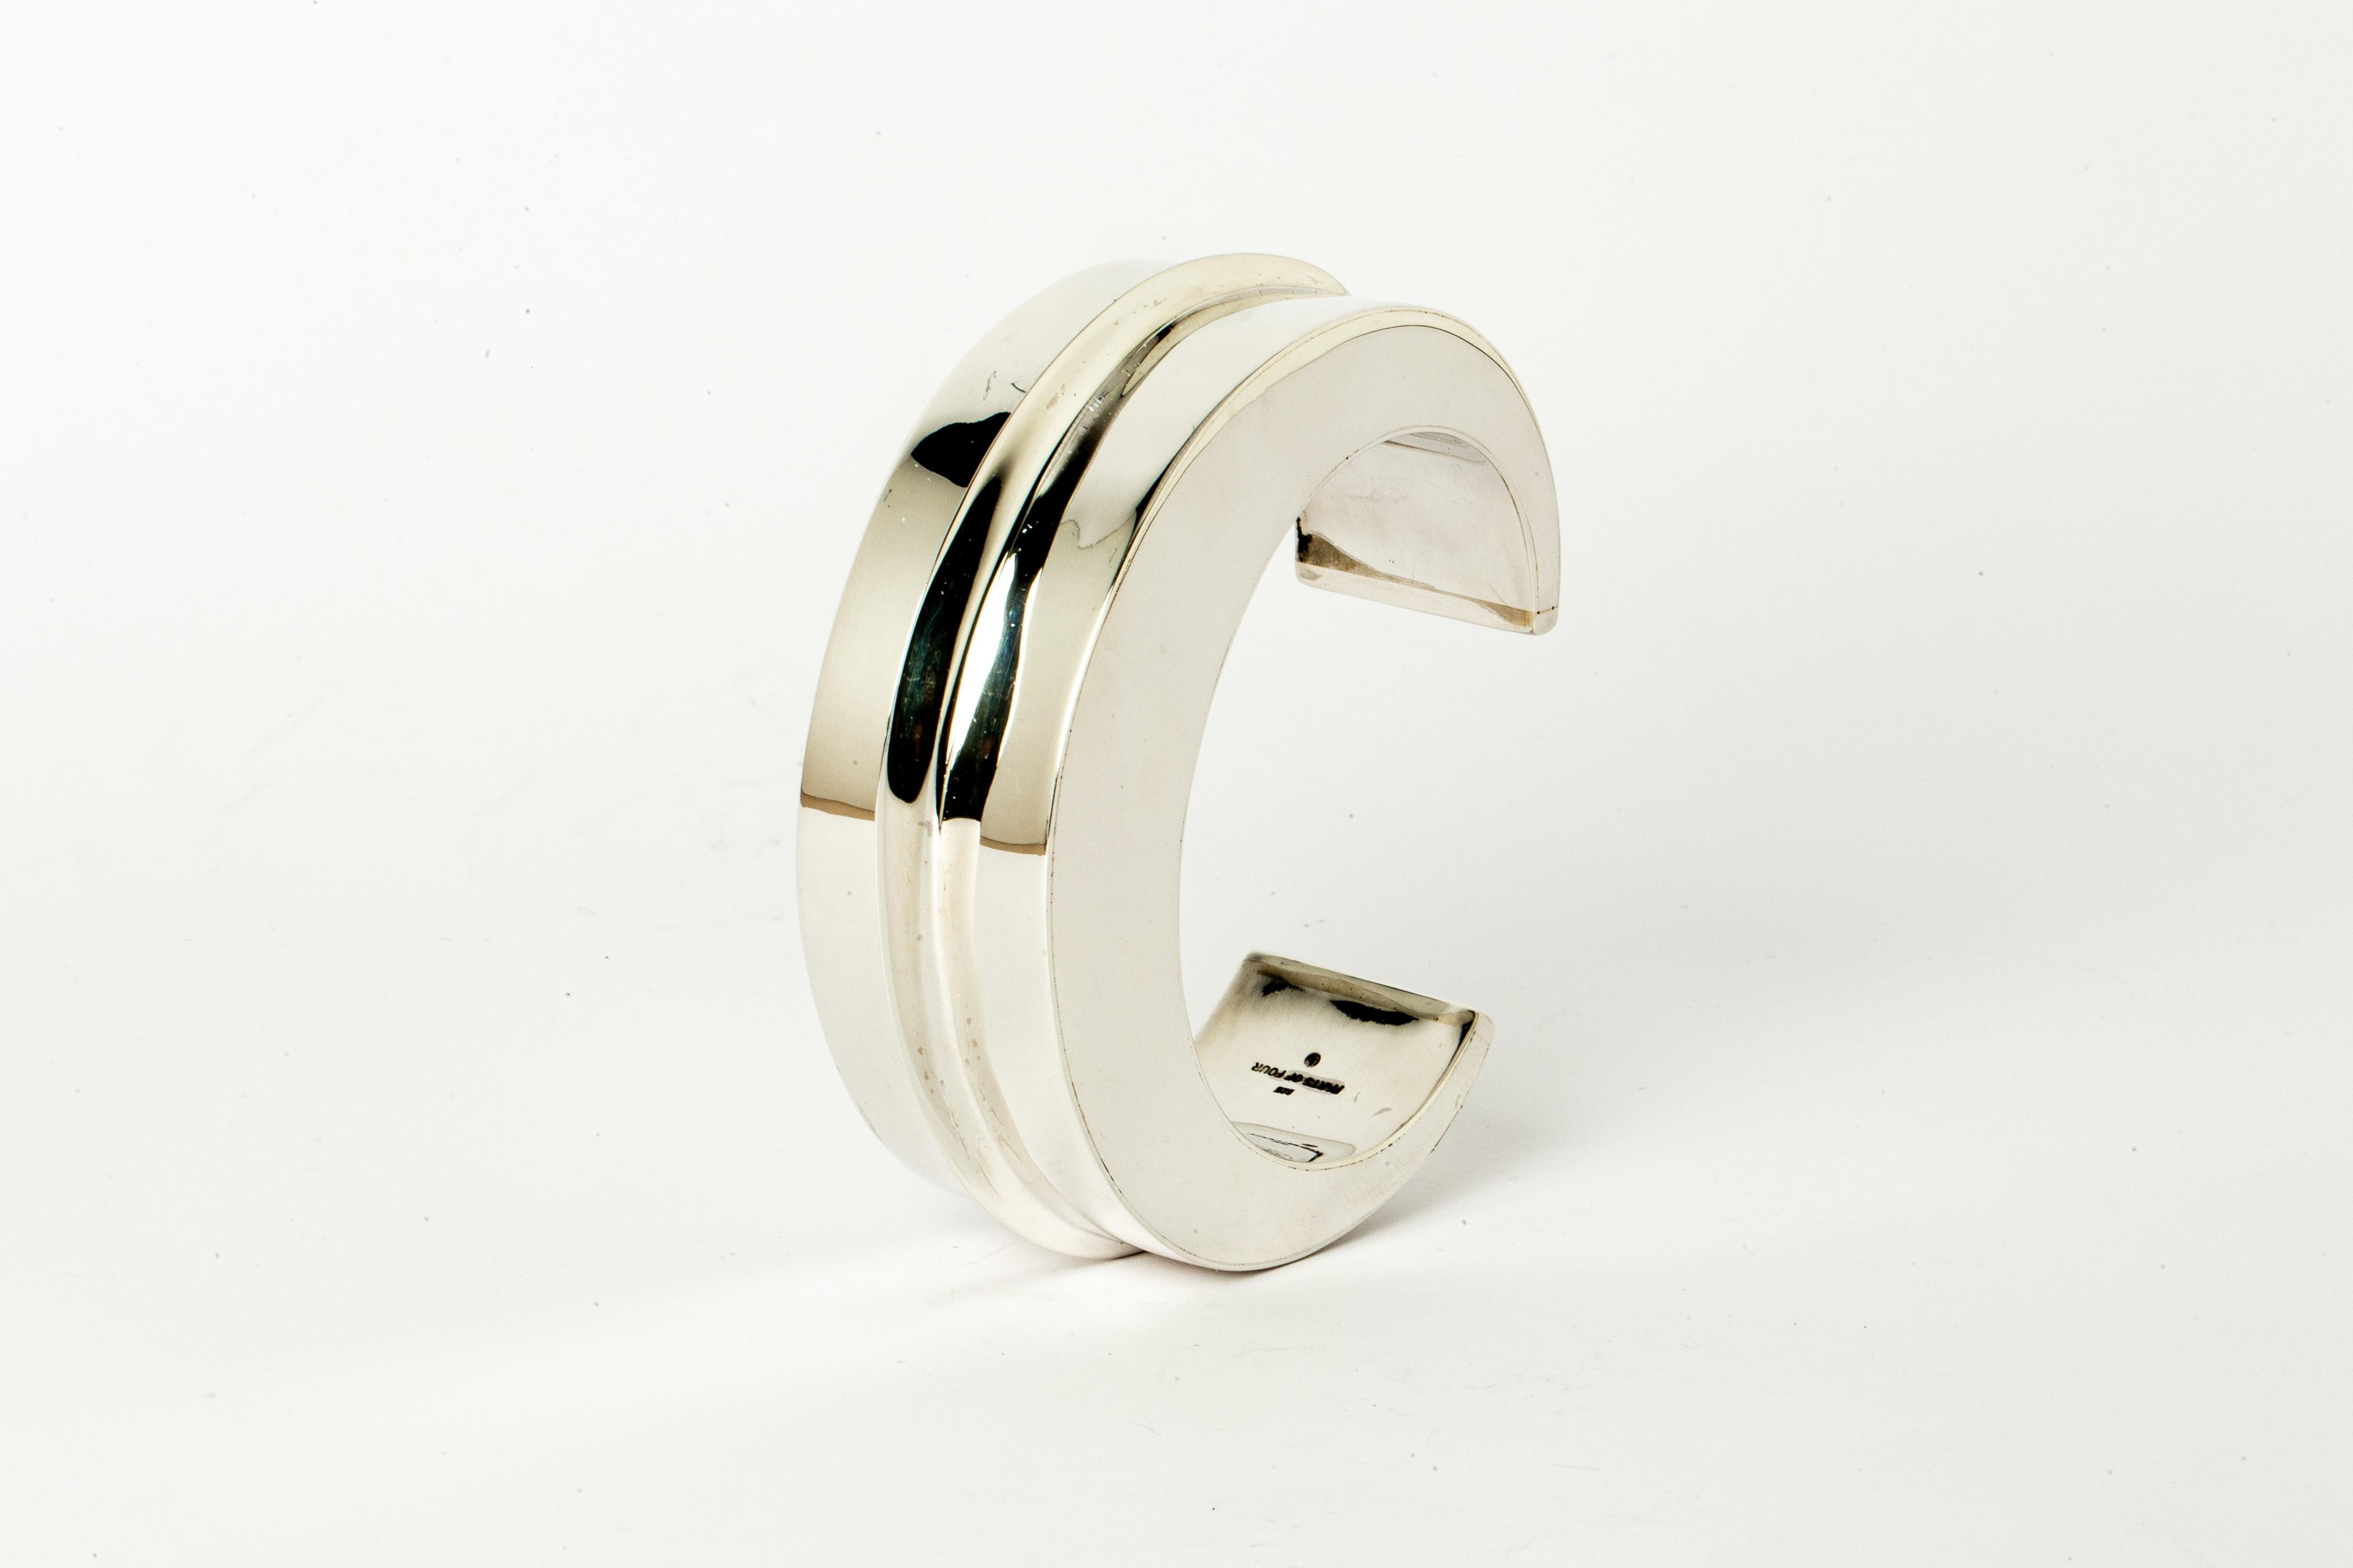 Bracelet in polished sterling silver. This piece is 100% hand fabricated from metal plate; cut into sections and soldered together to make the hollow three dimensional form. Foldforming is the process of folding metal. The process of folding and